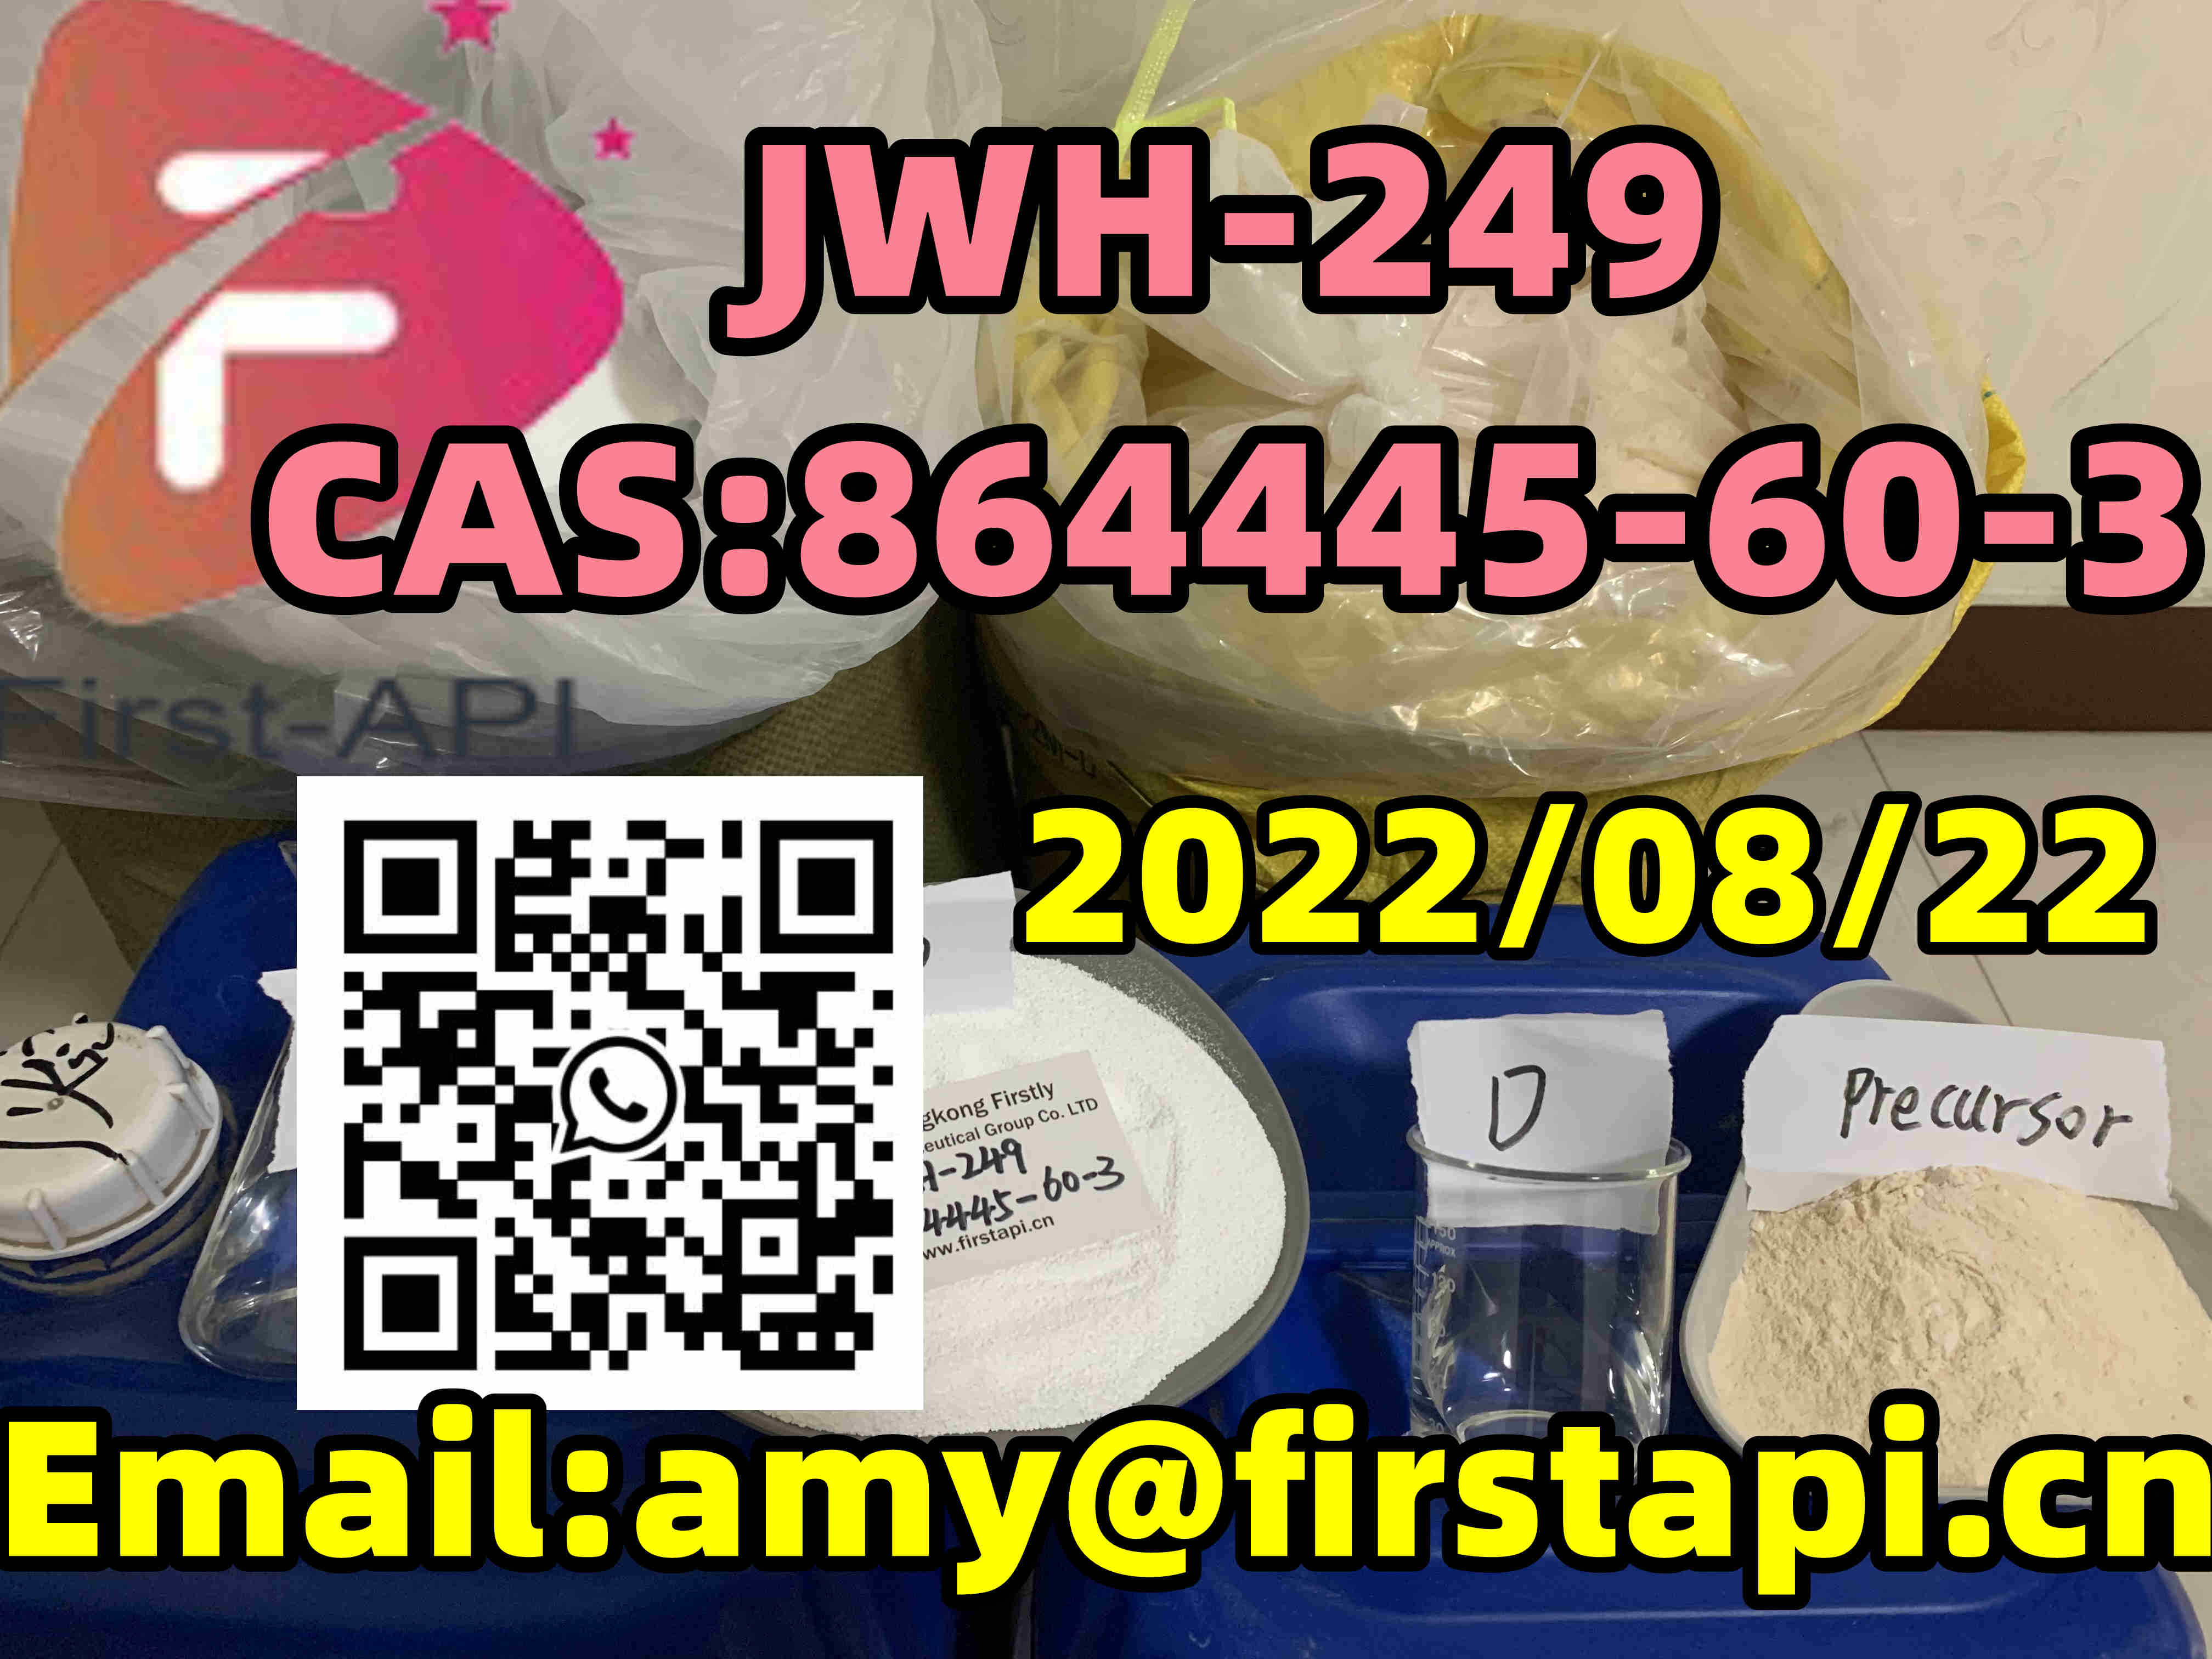 JWH-249,high quality,low price,CAS:864445-60-3,fast delivery - photo